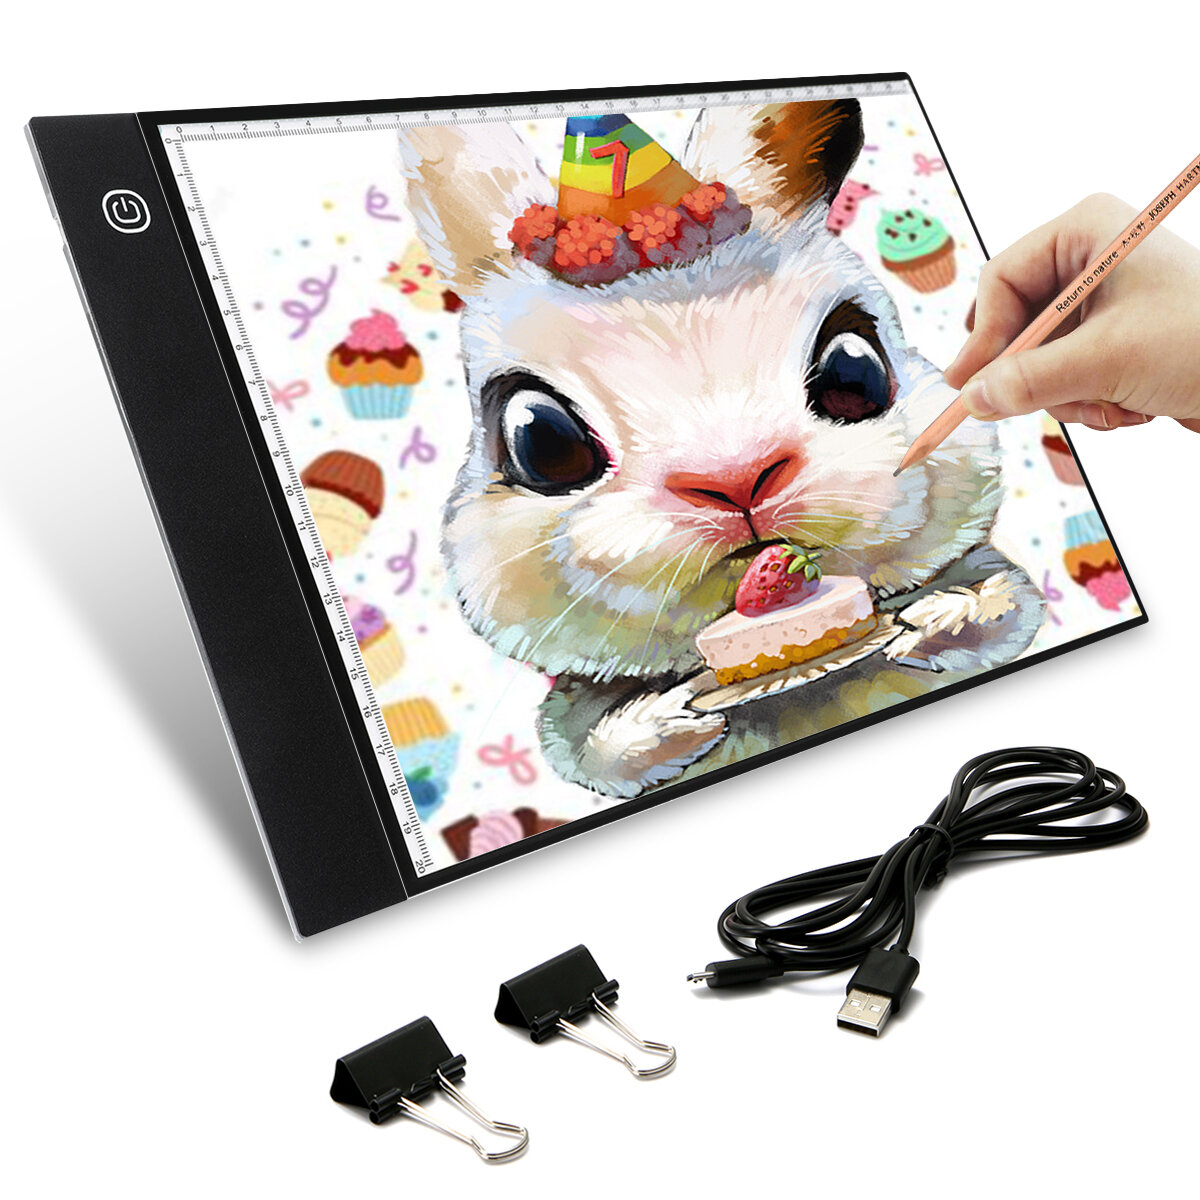 

A4 LED Digital Drawing Graphic Tablet Writing Painting Box Tracing Board LED Light Pad Copy Board with Brightness Contro